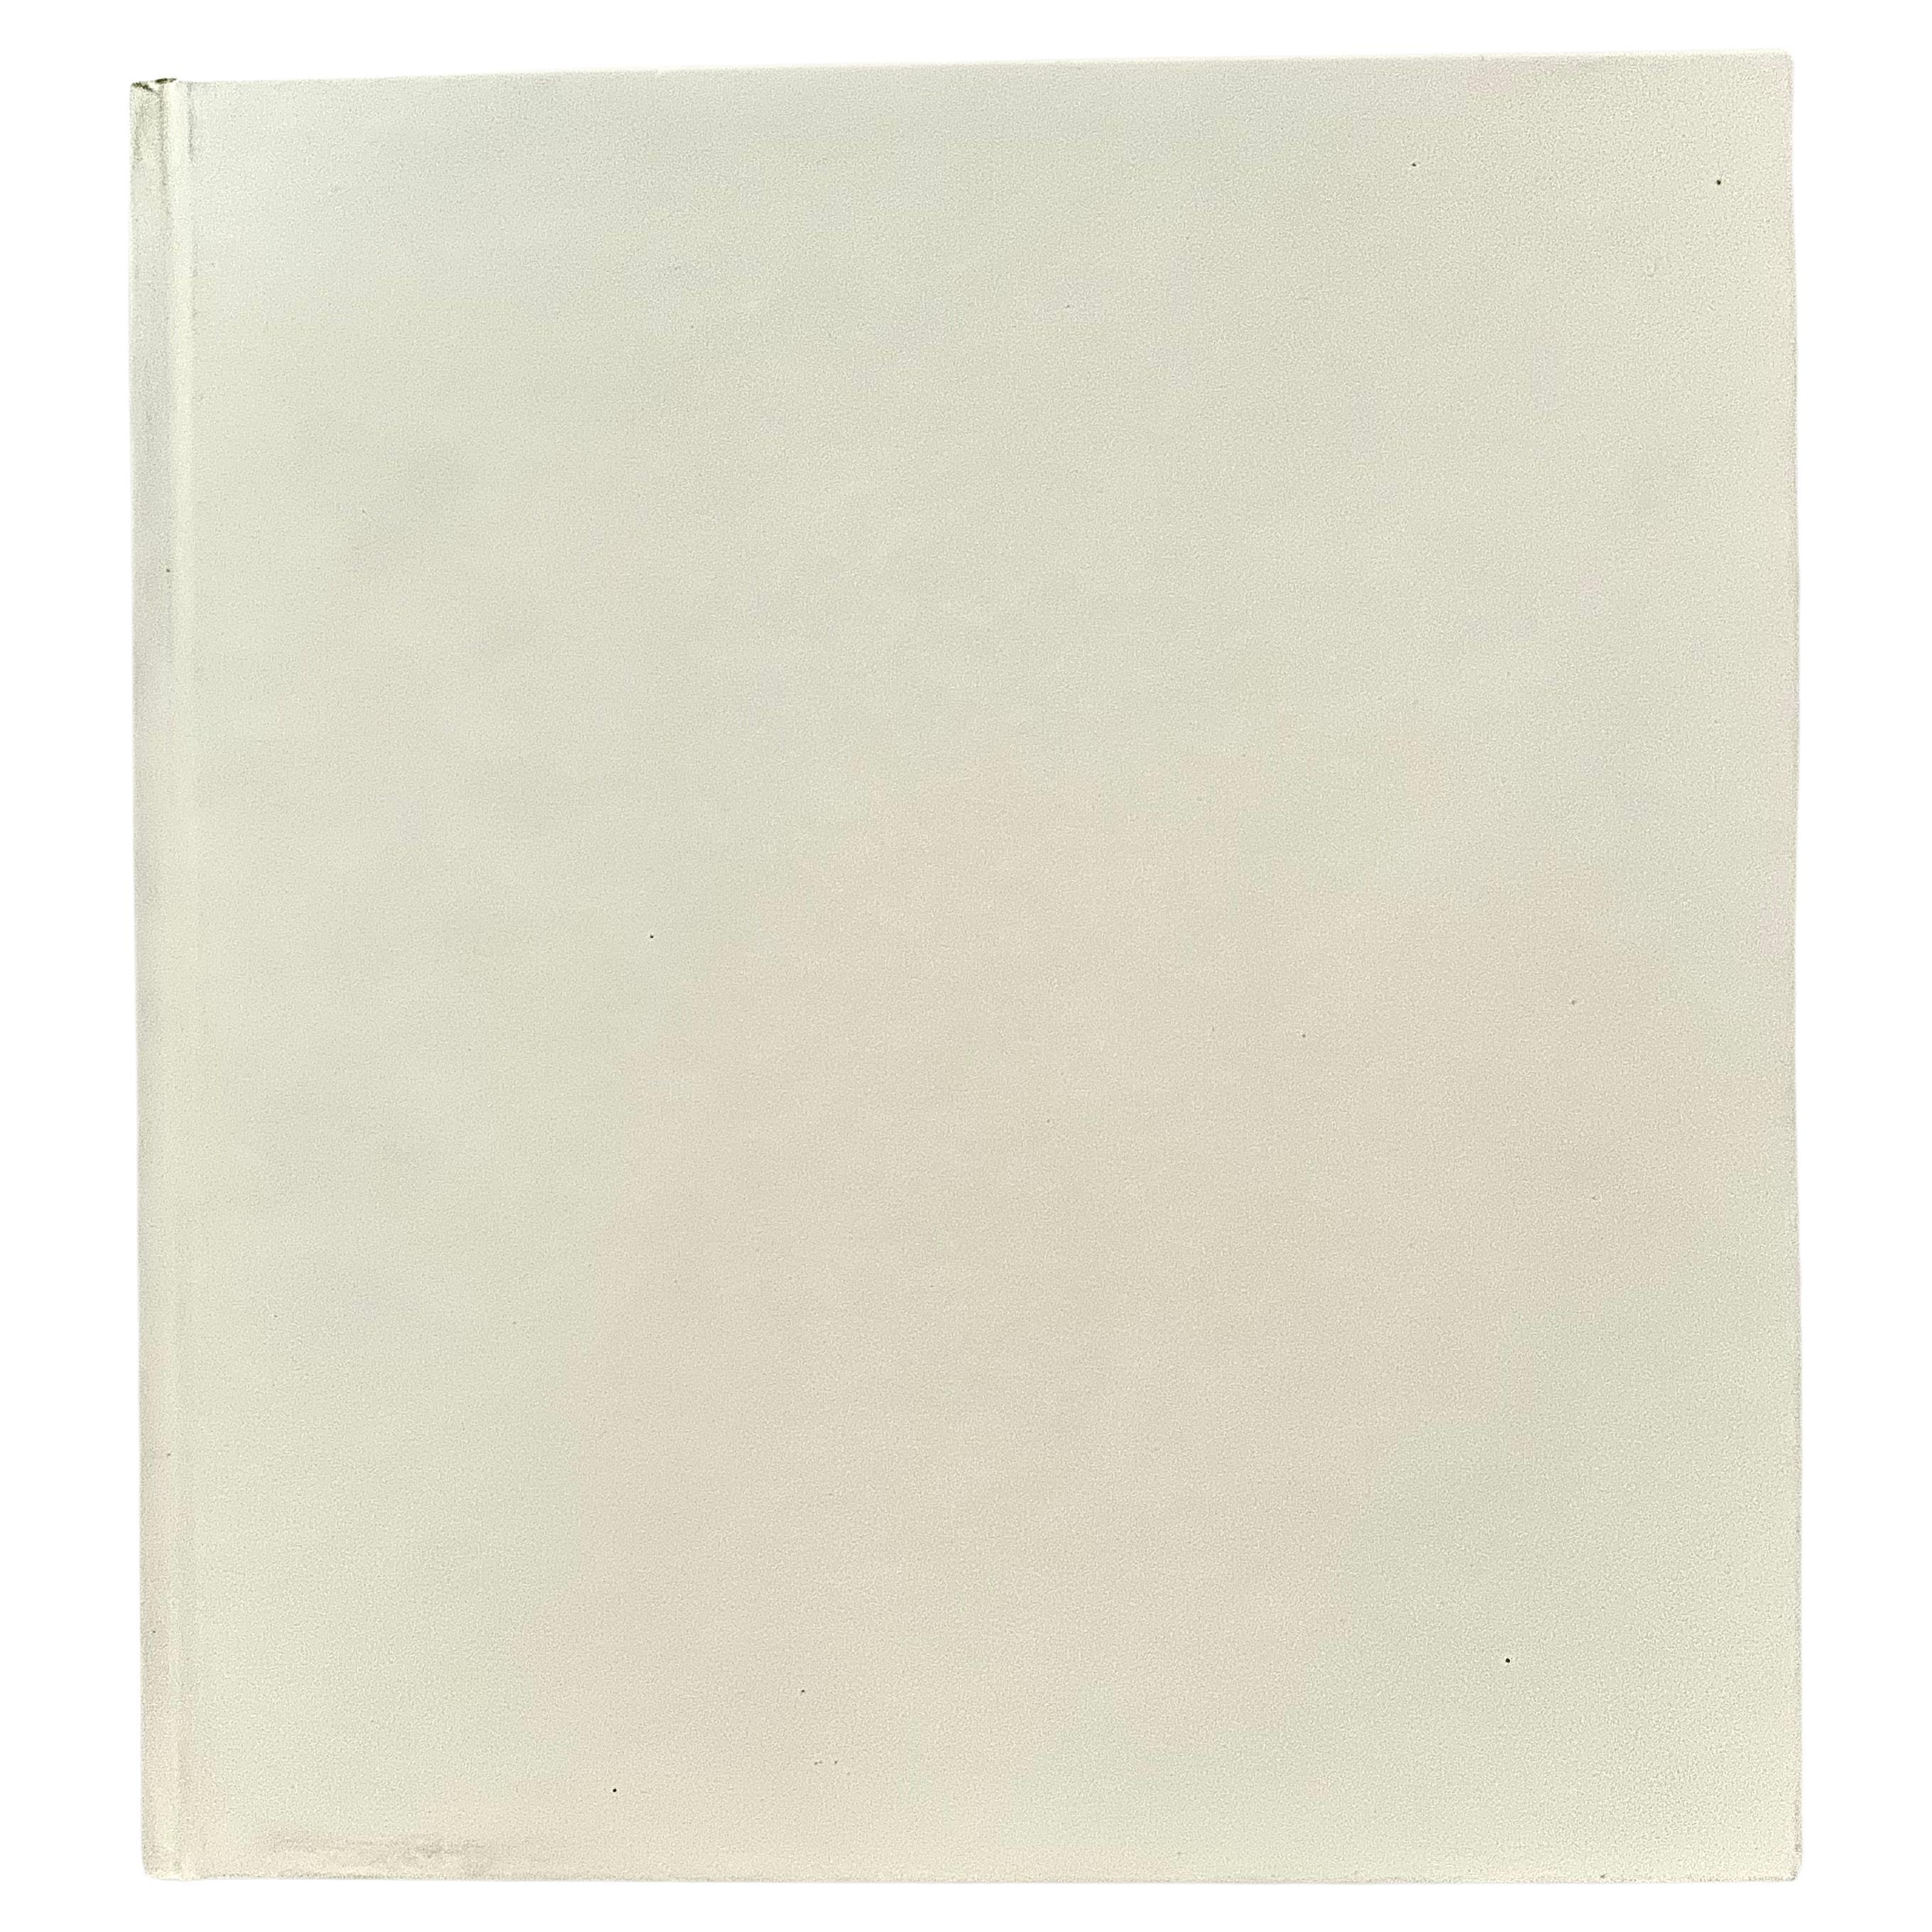 Hiroshi Sugimoto: Theaters - Hans Belting - 1st Edition, New York/ London, 2000 For Sale